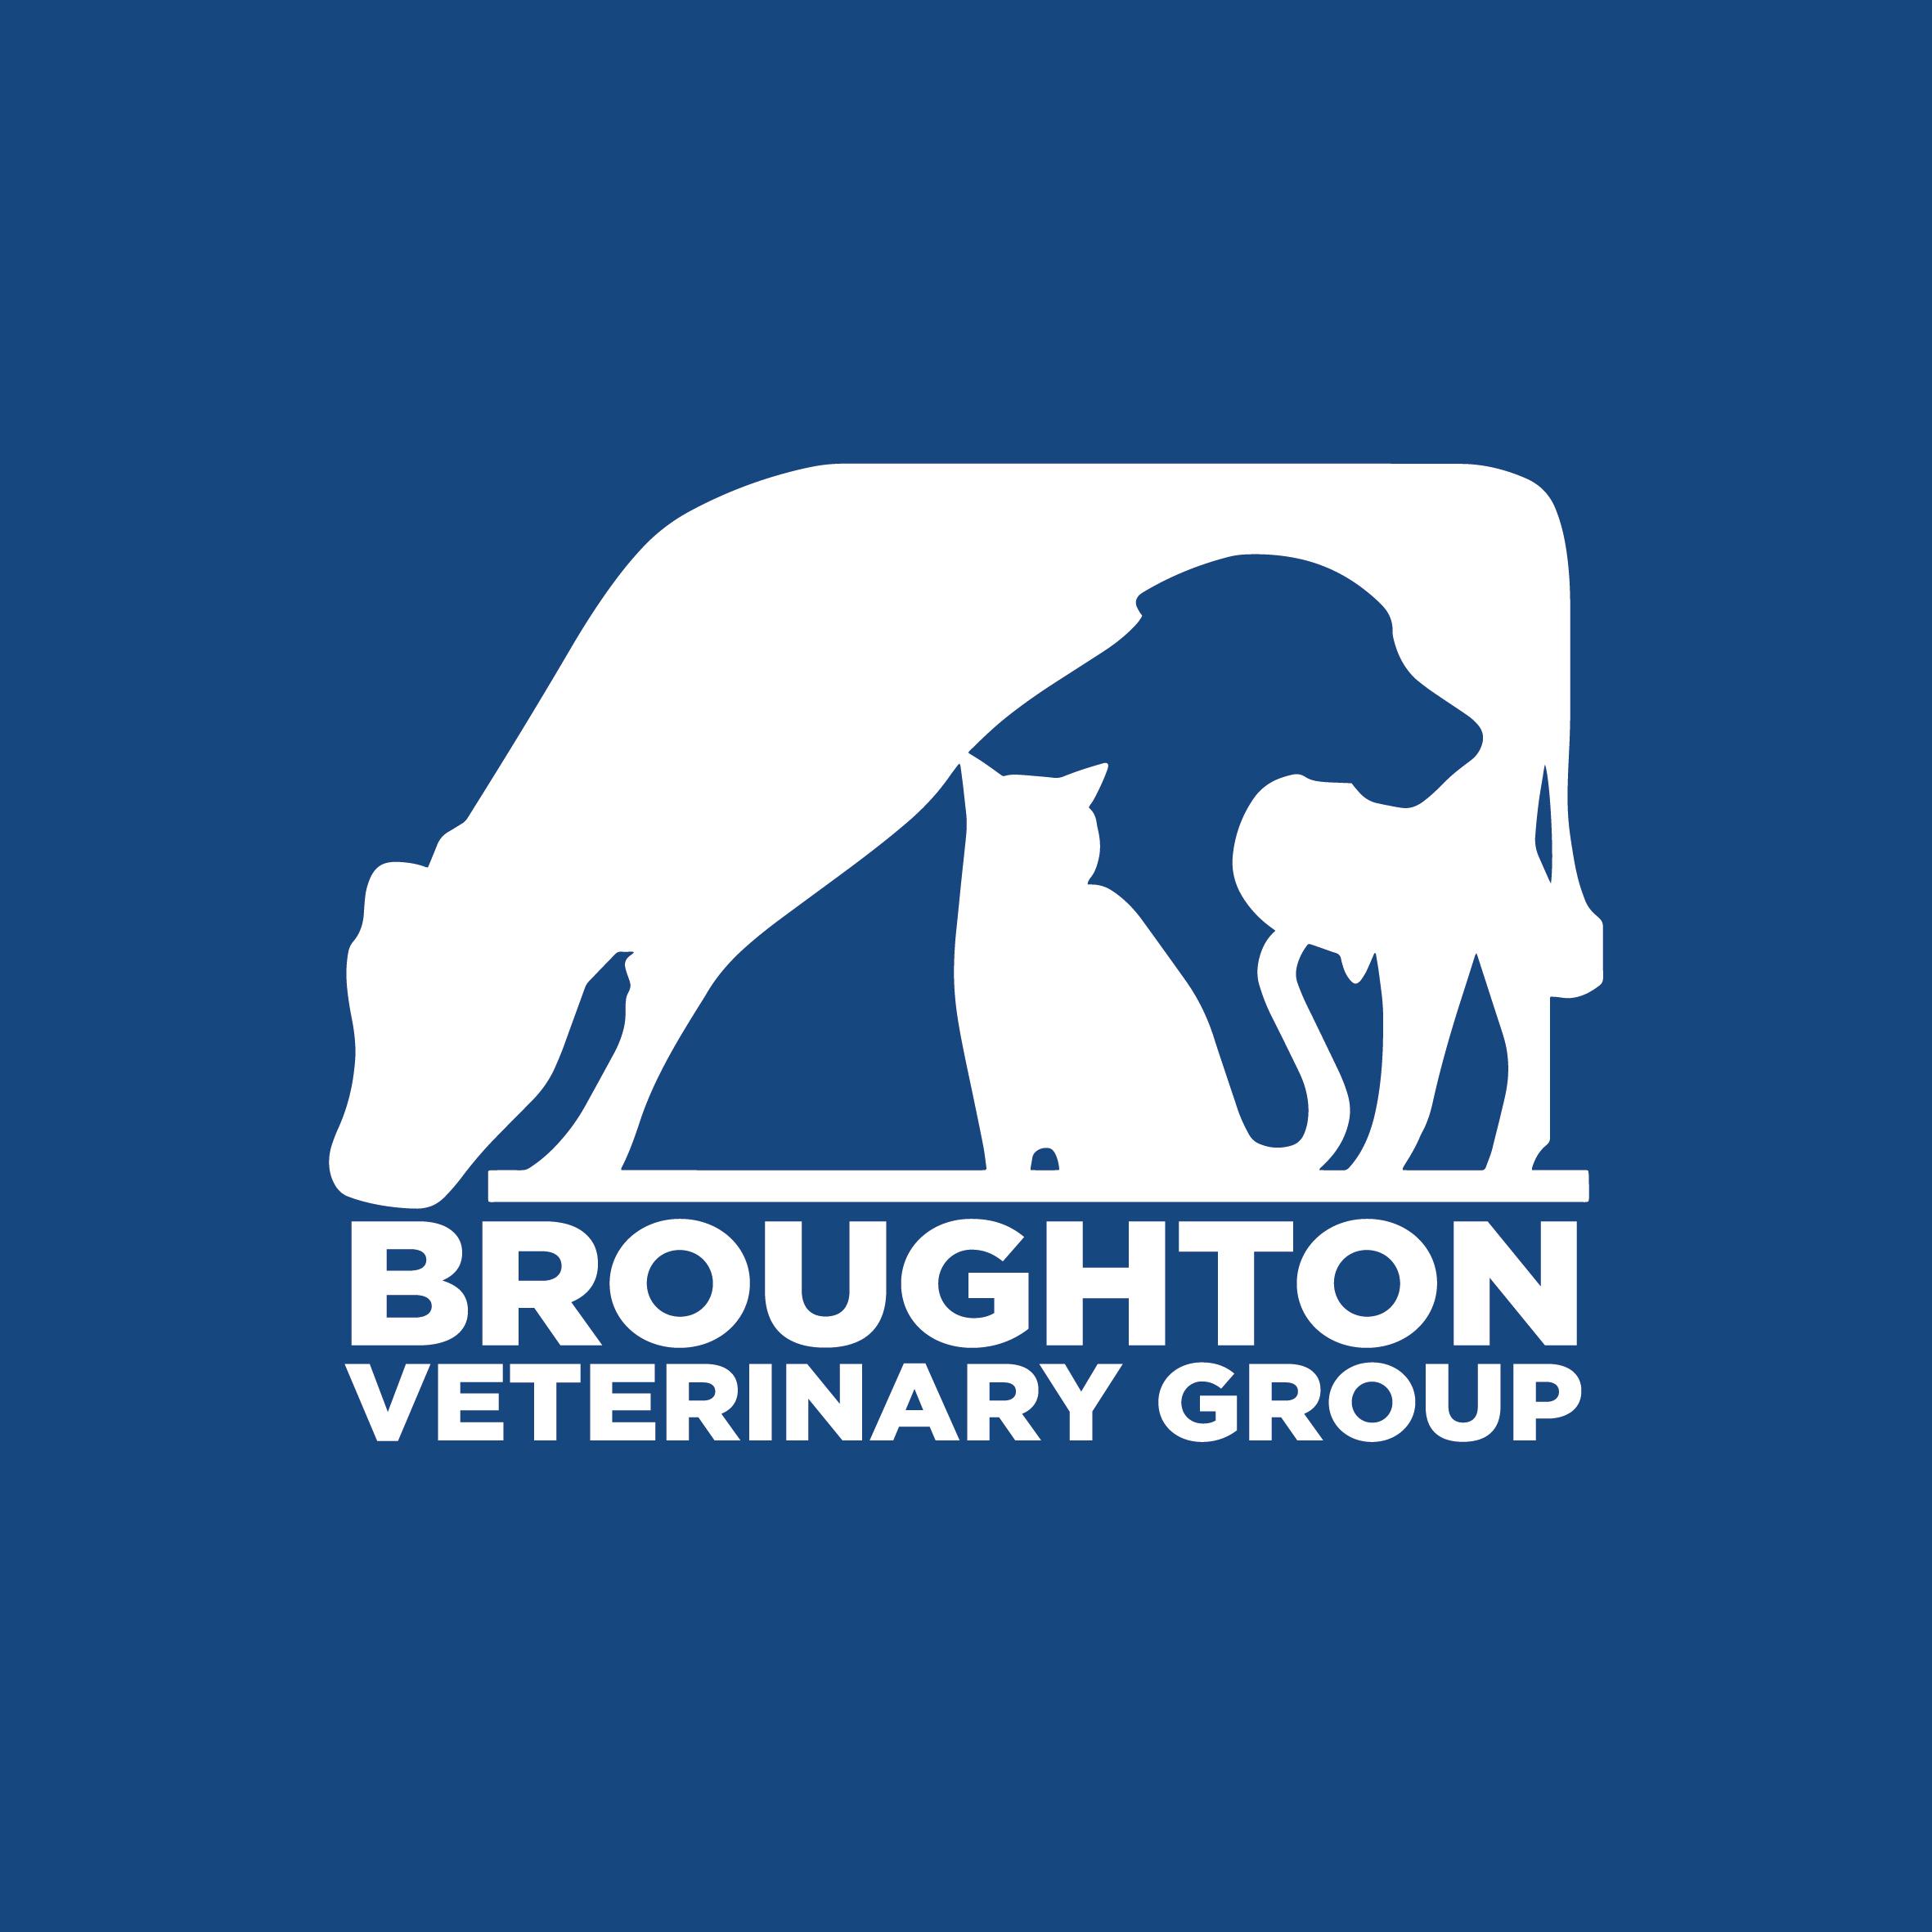 Broughton Veterinary Group, Leicester - Leicester, Leicestershire LE3 5QW - 01162 517677 | ShowMeLocal.com